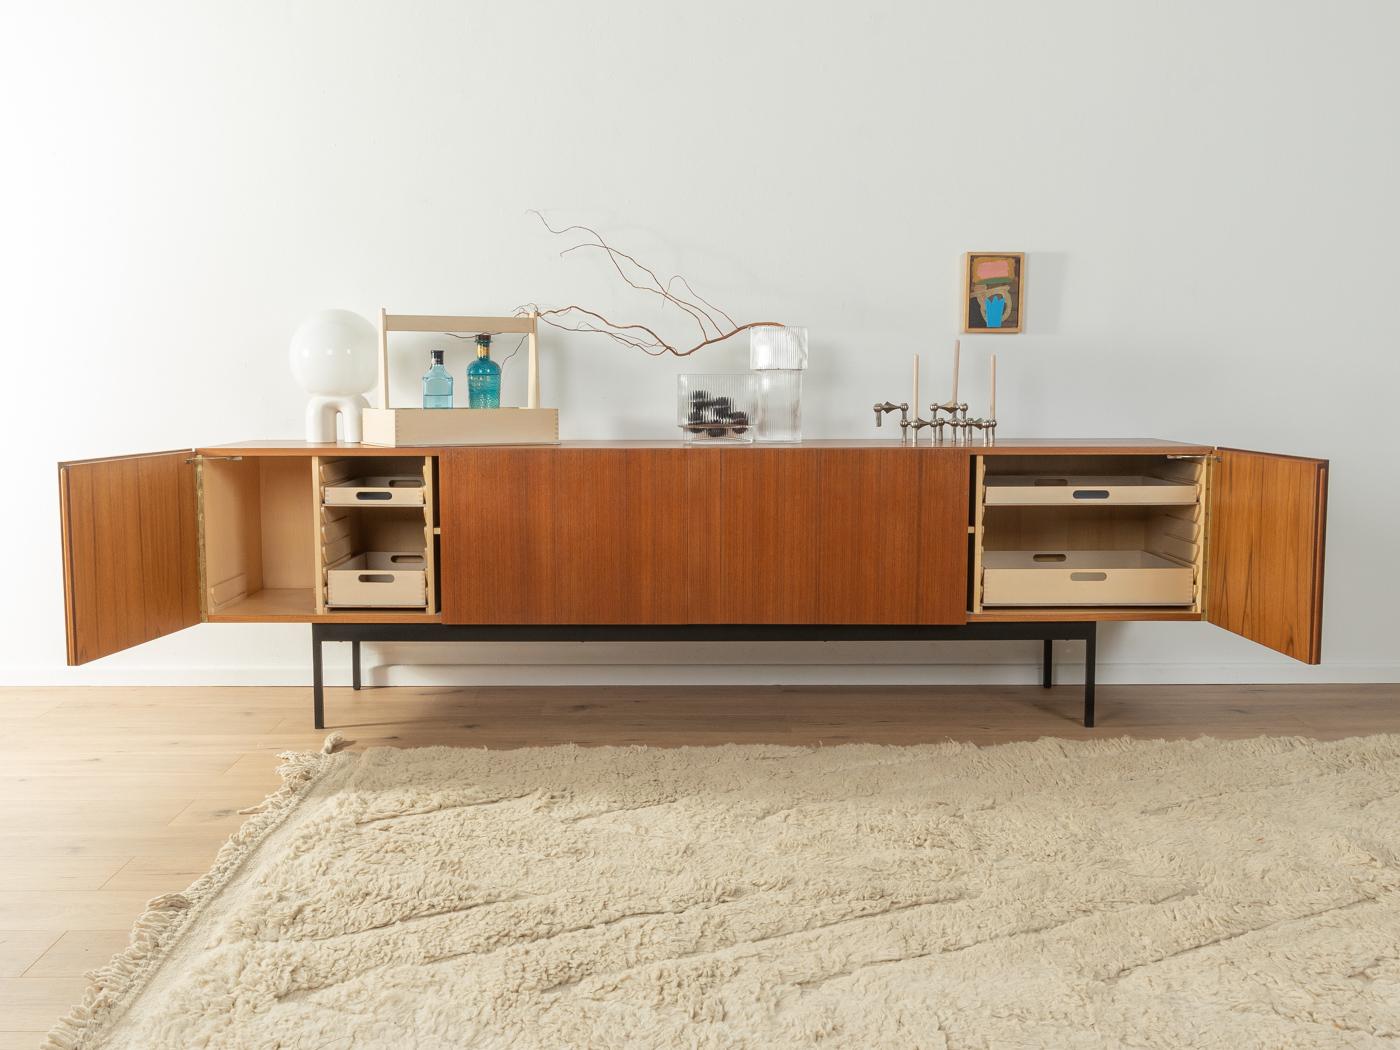 Puristic sideboard from the 1950s by Dieter Wäckerlin for Behr Möbel, model B40. Corpus in teak veneer with four doors, four internal drawers, a bottle tray, two shelves and squared steel feet in black.

Quality Features:
 Accomplished design: